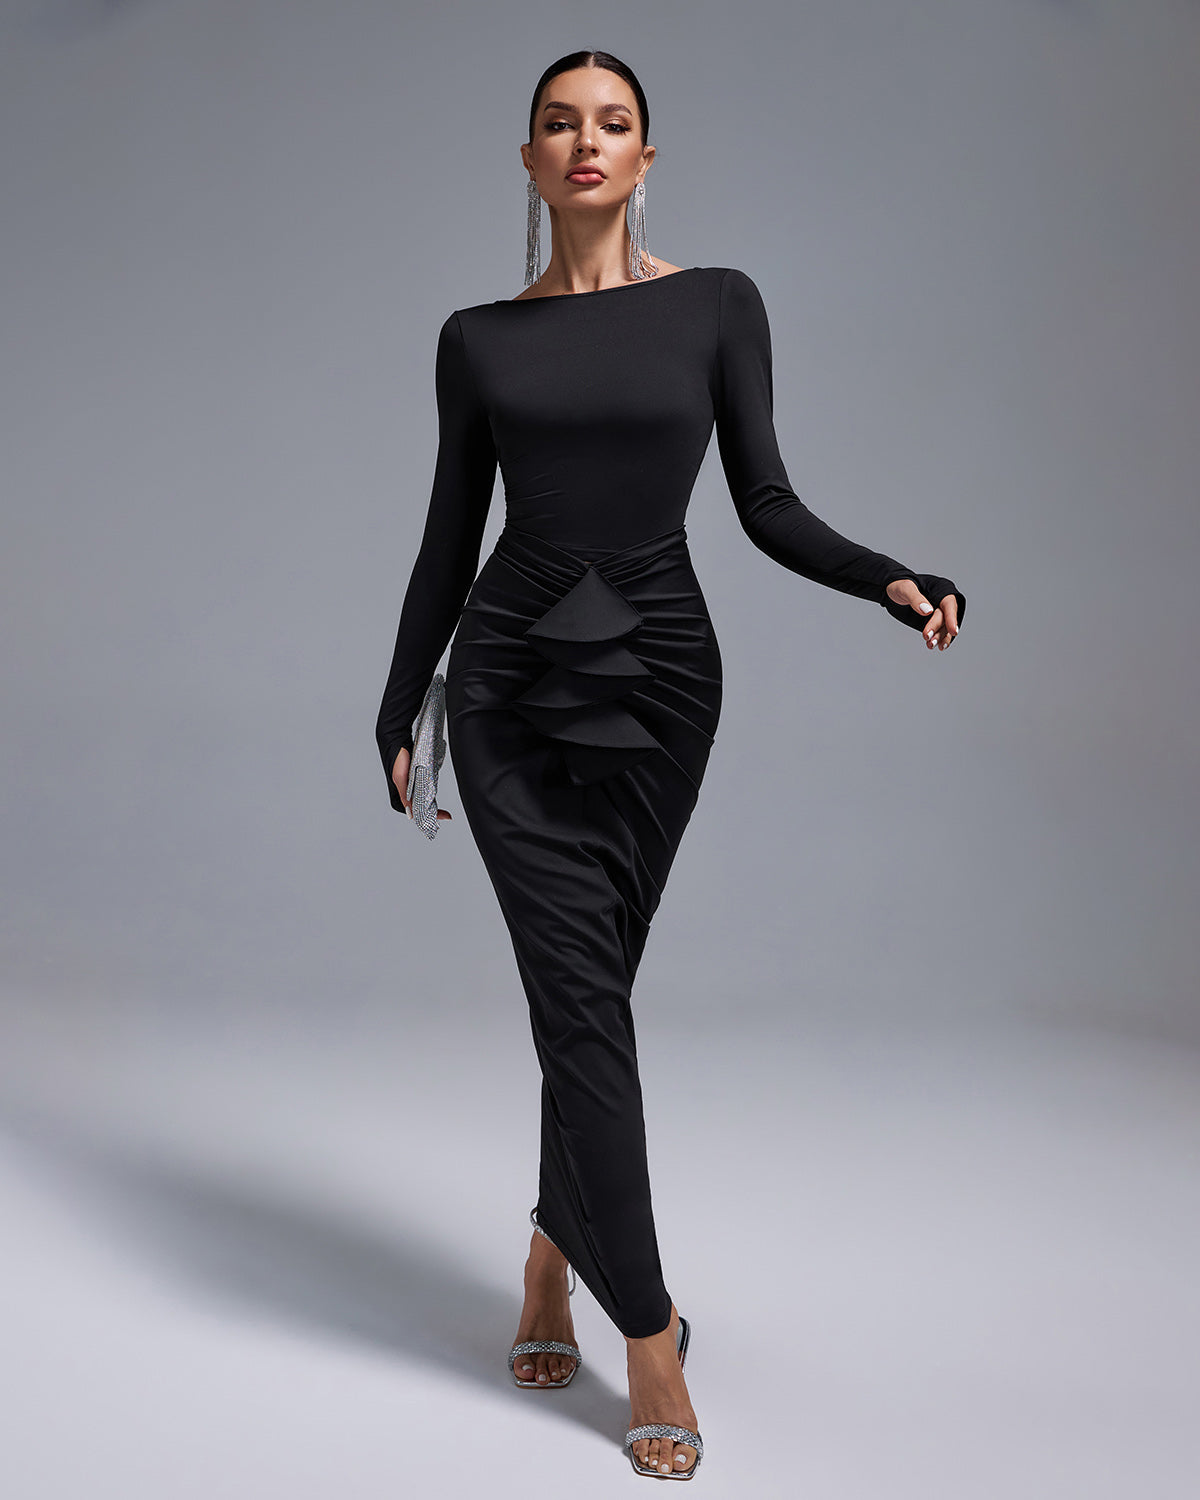 Ruched Skirt Round Neck Open Back Bodycon Set